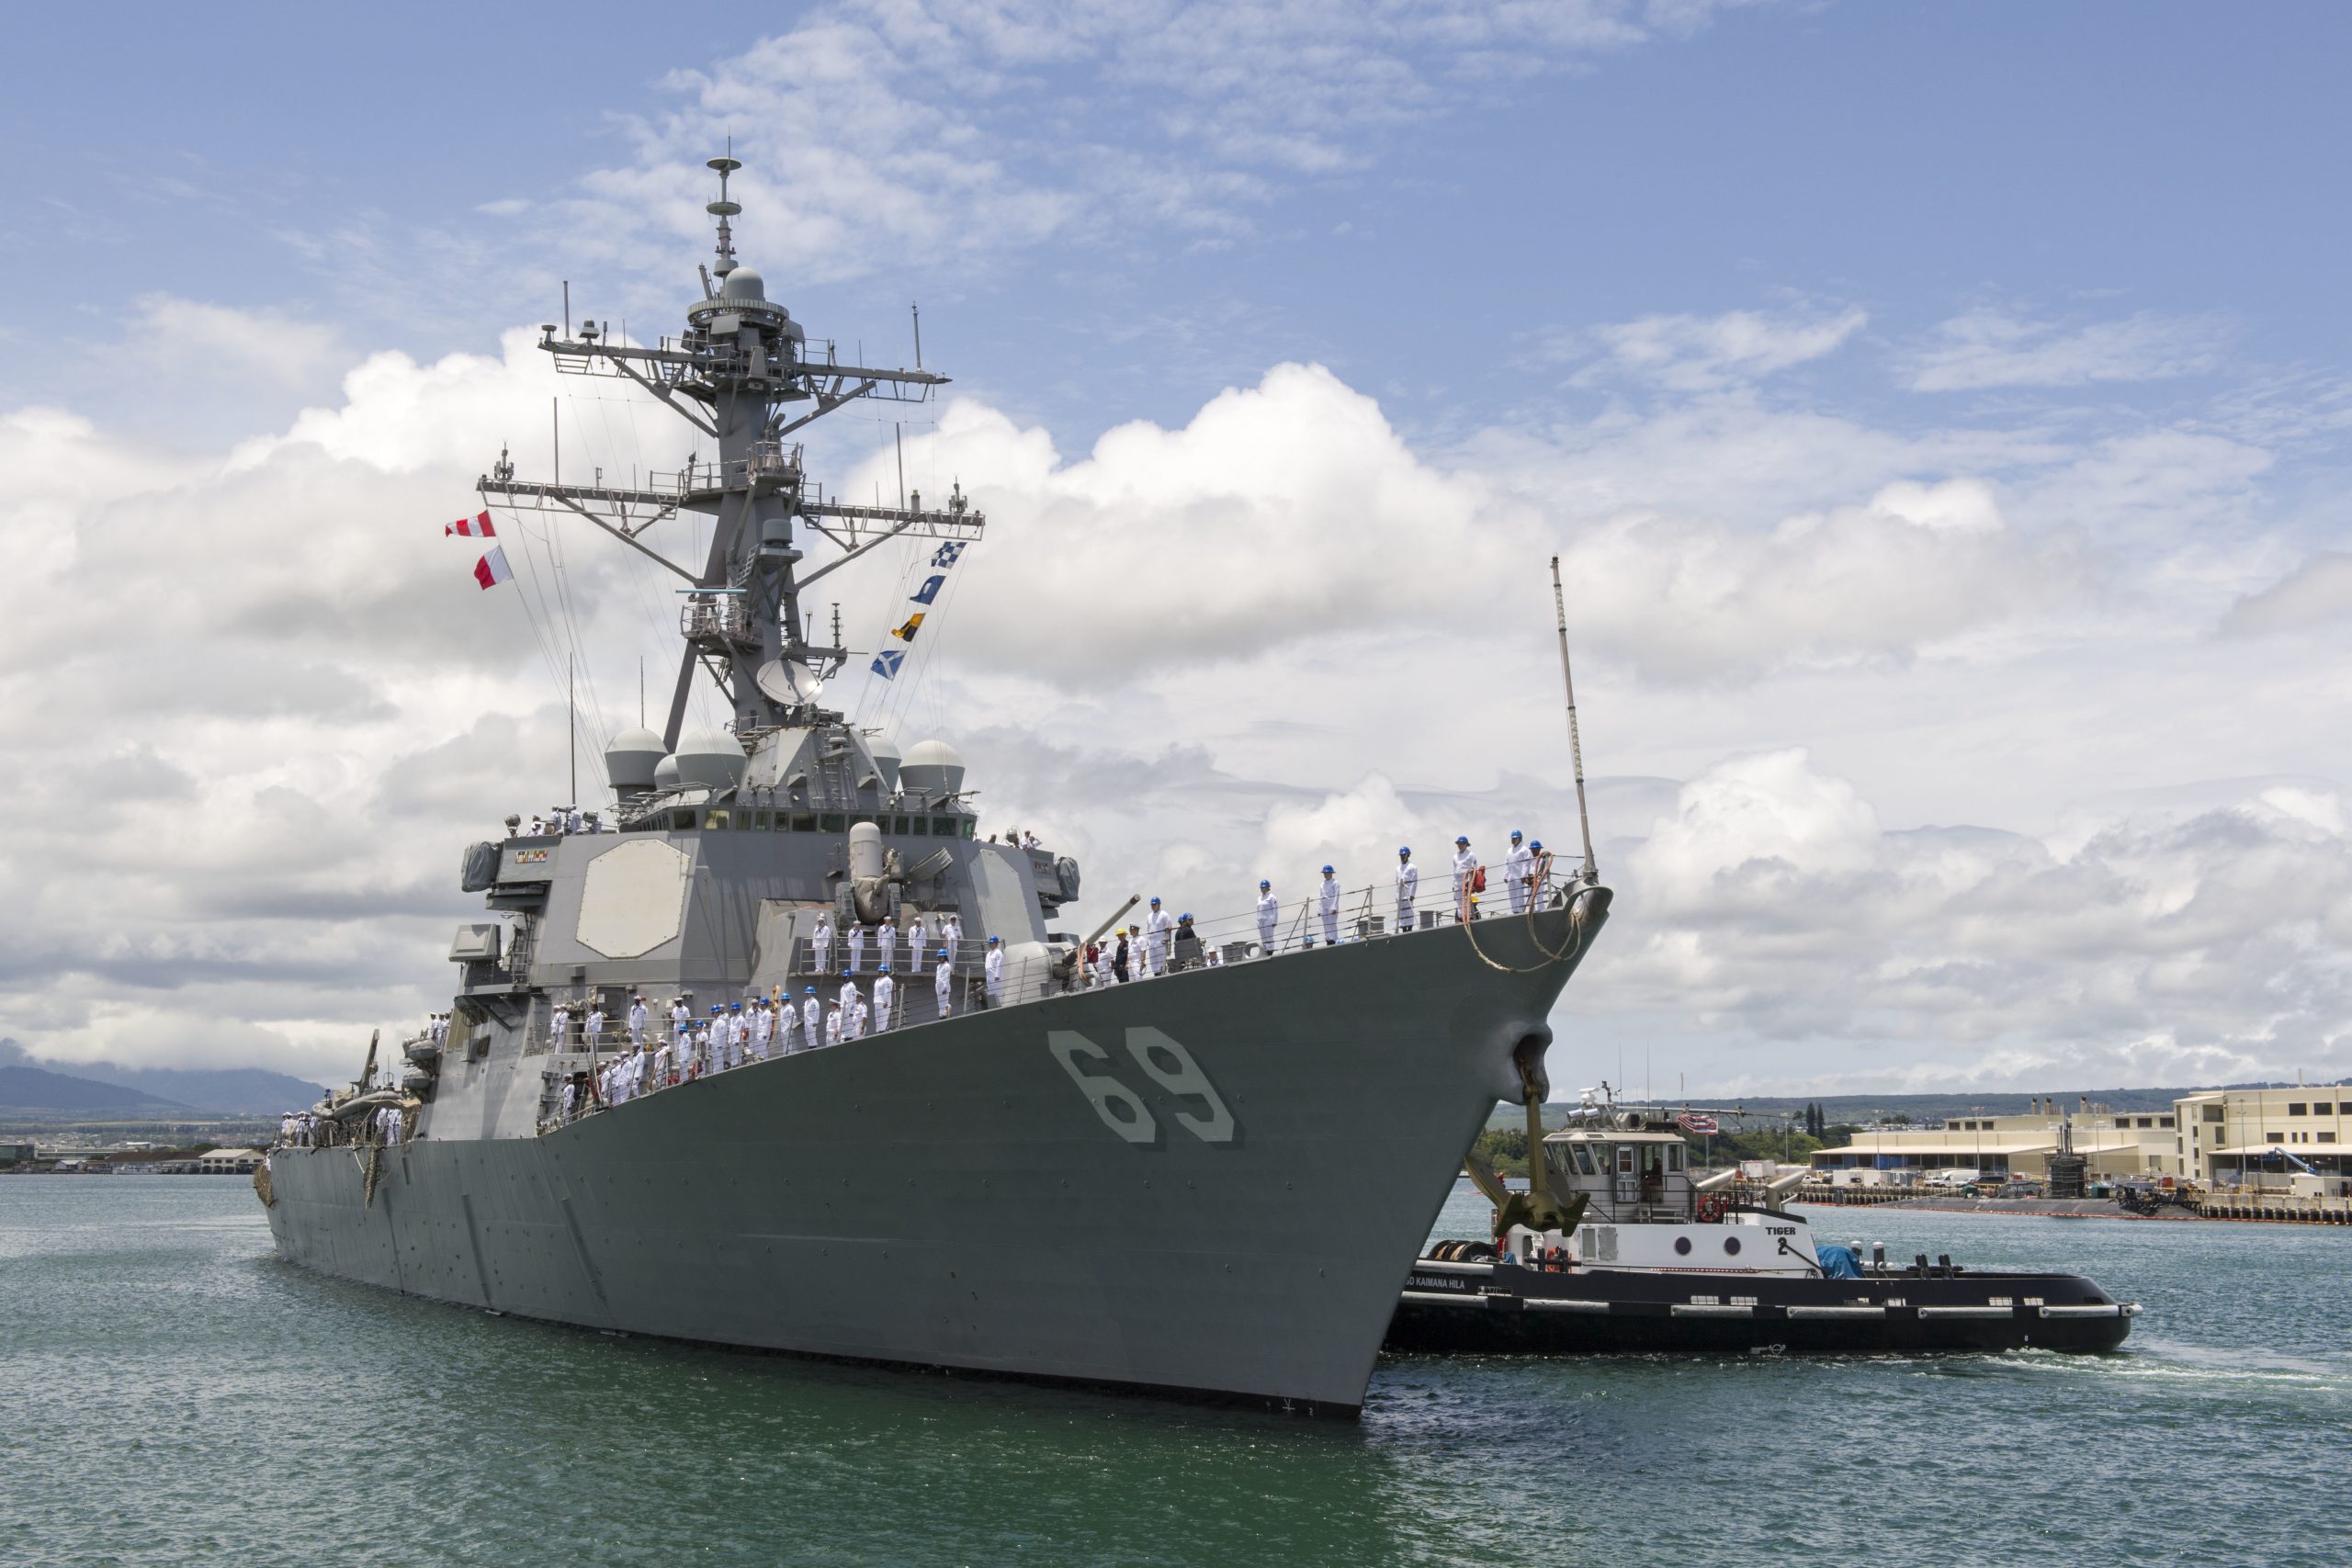 The guided missile destroyer USS Milius arrives in Pearl Harbor, Hawaii, May 3, 2018. The Milius was in transit to Yokosuka, Japan, to join Destroyer Squadron 15. Navy photo by Petty Officer 2nd Class Katarzyna Kobiljak. -